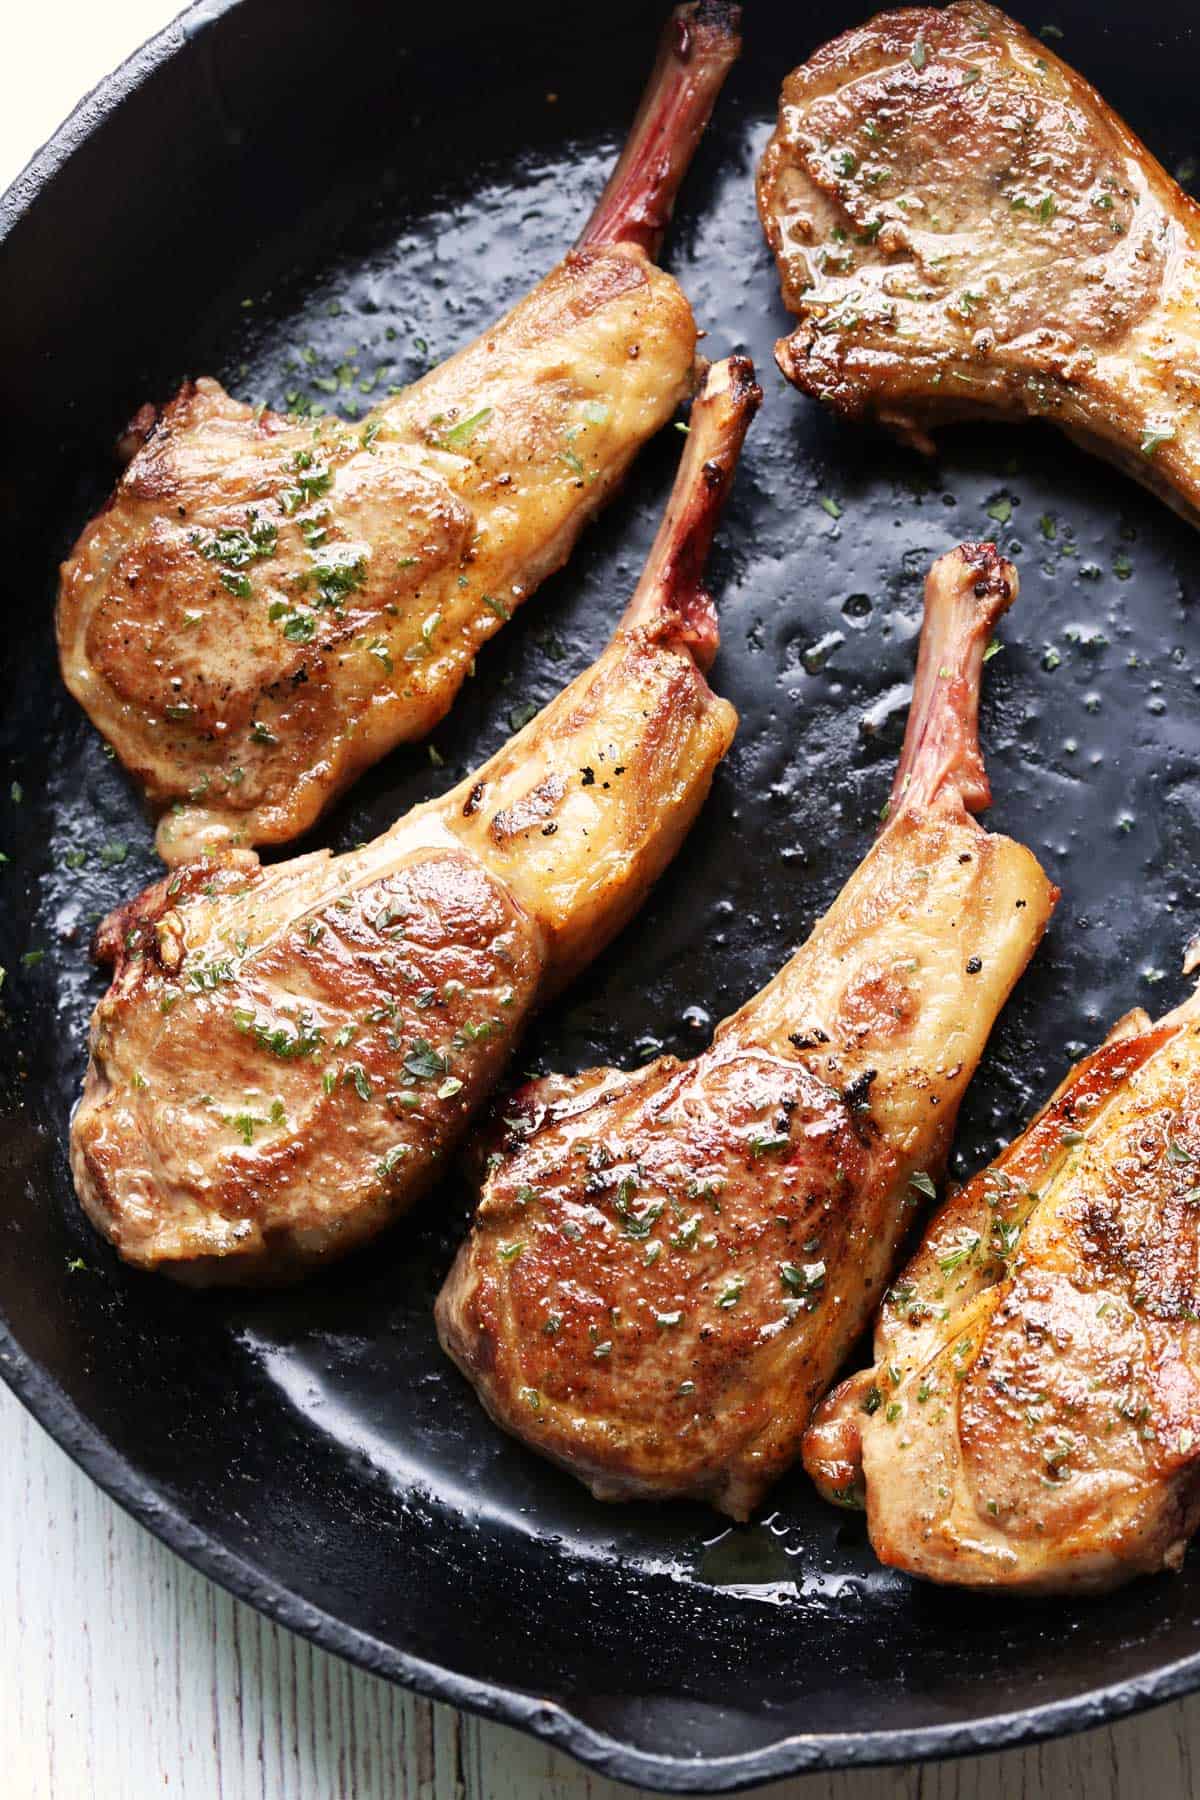 Pan fried lamb chops in a cast-iron skillet.